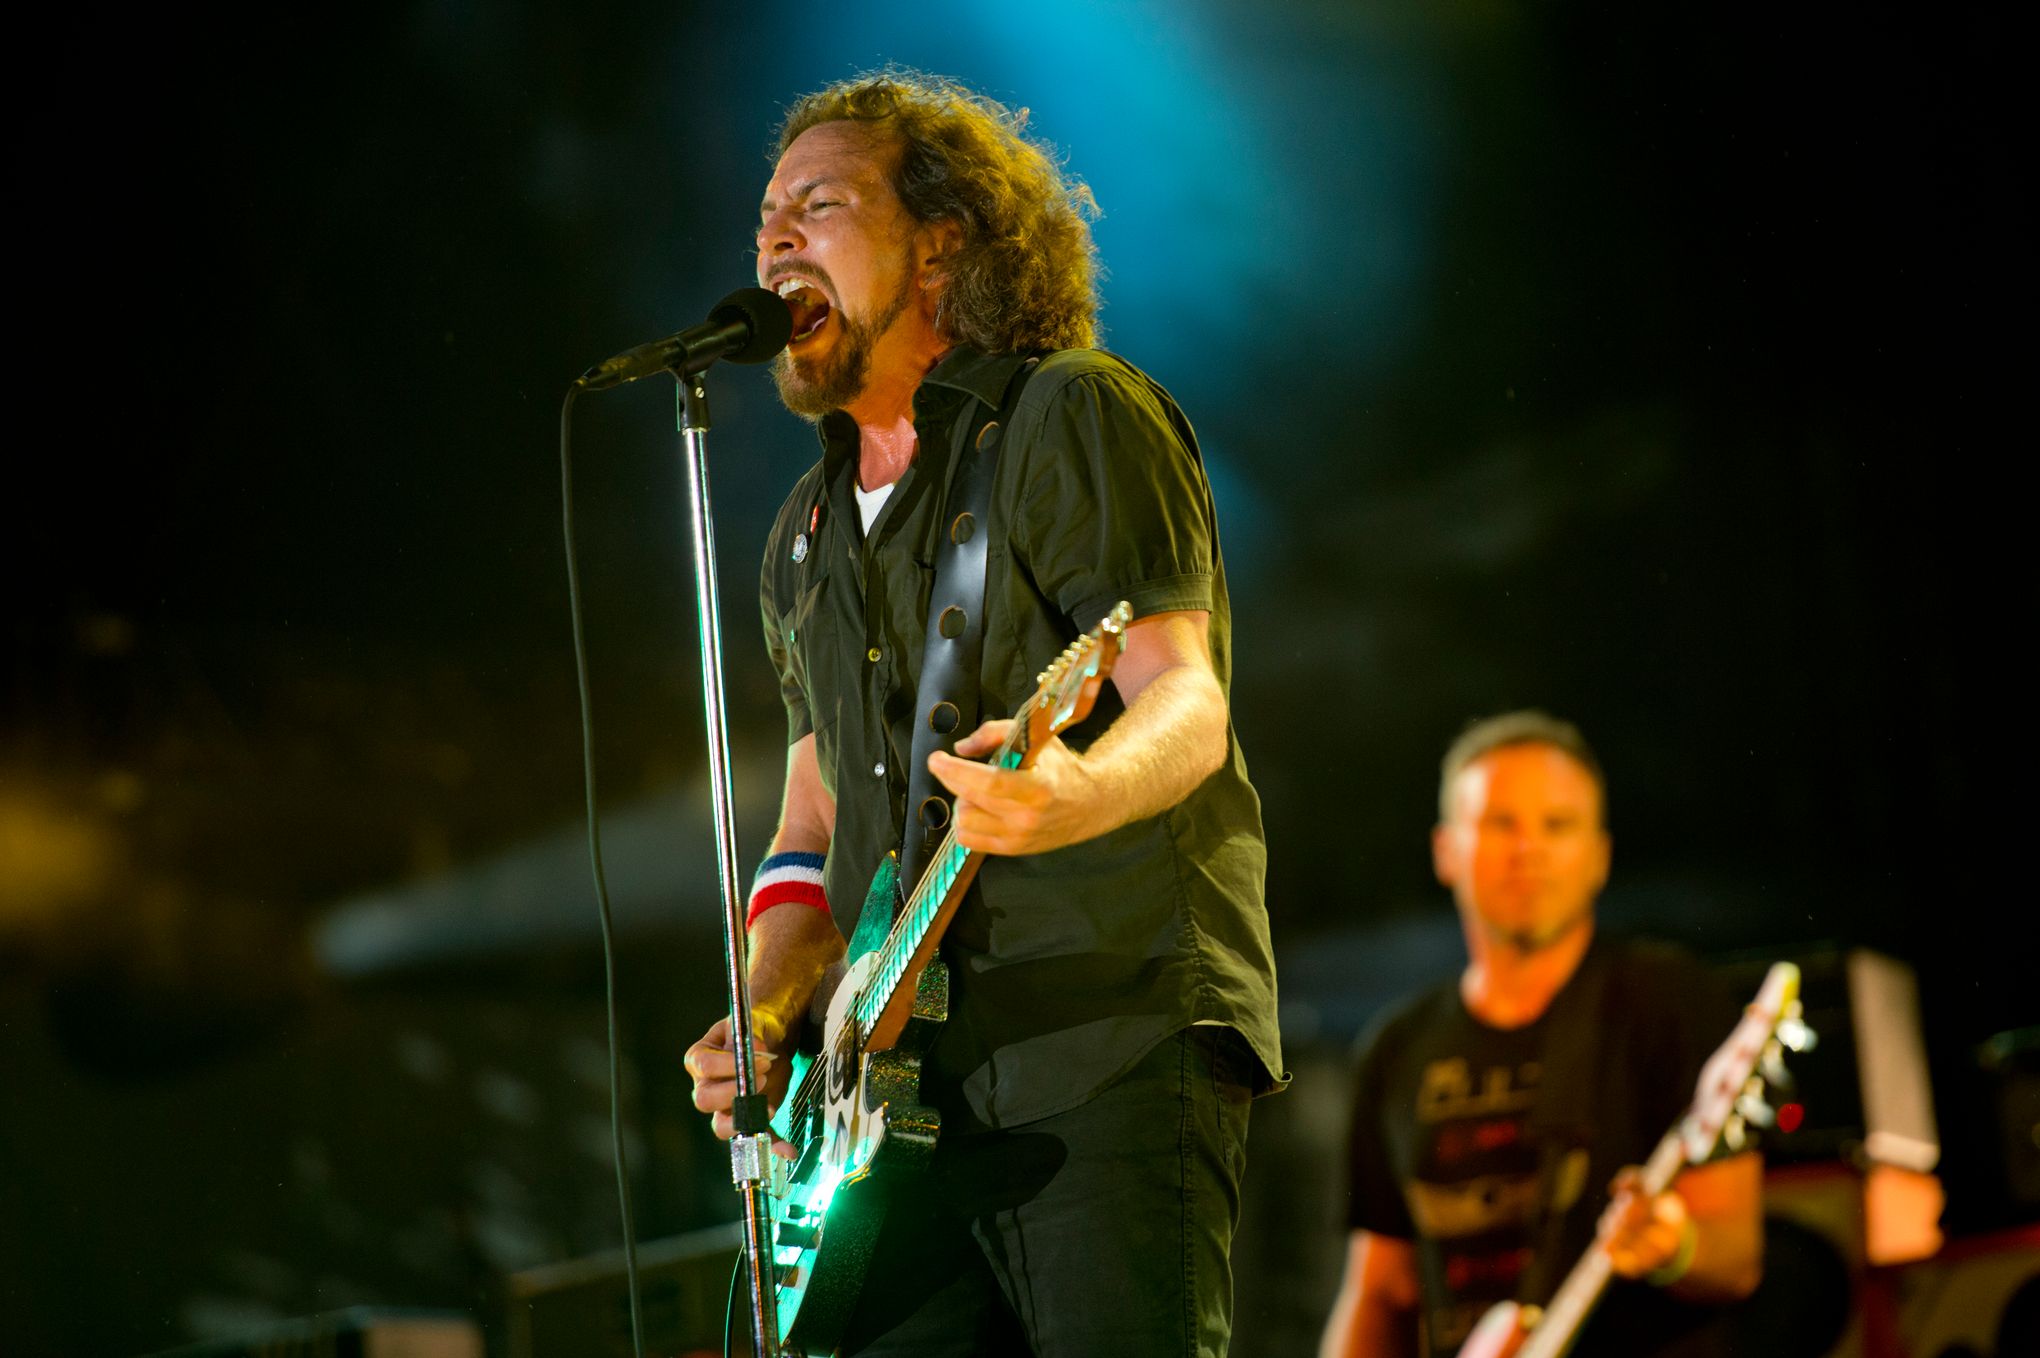 Why Pearl Jam could never top their debut album 'Ten